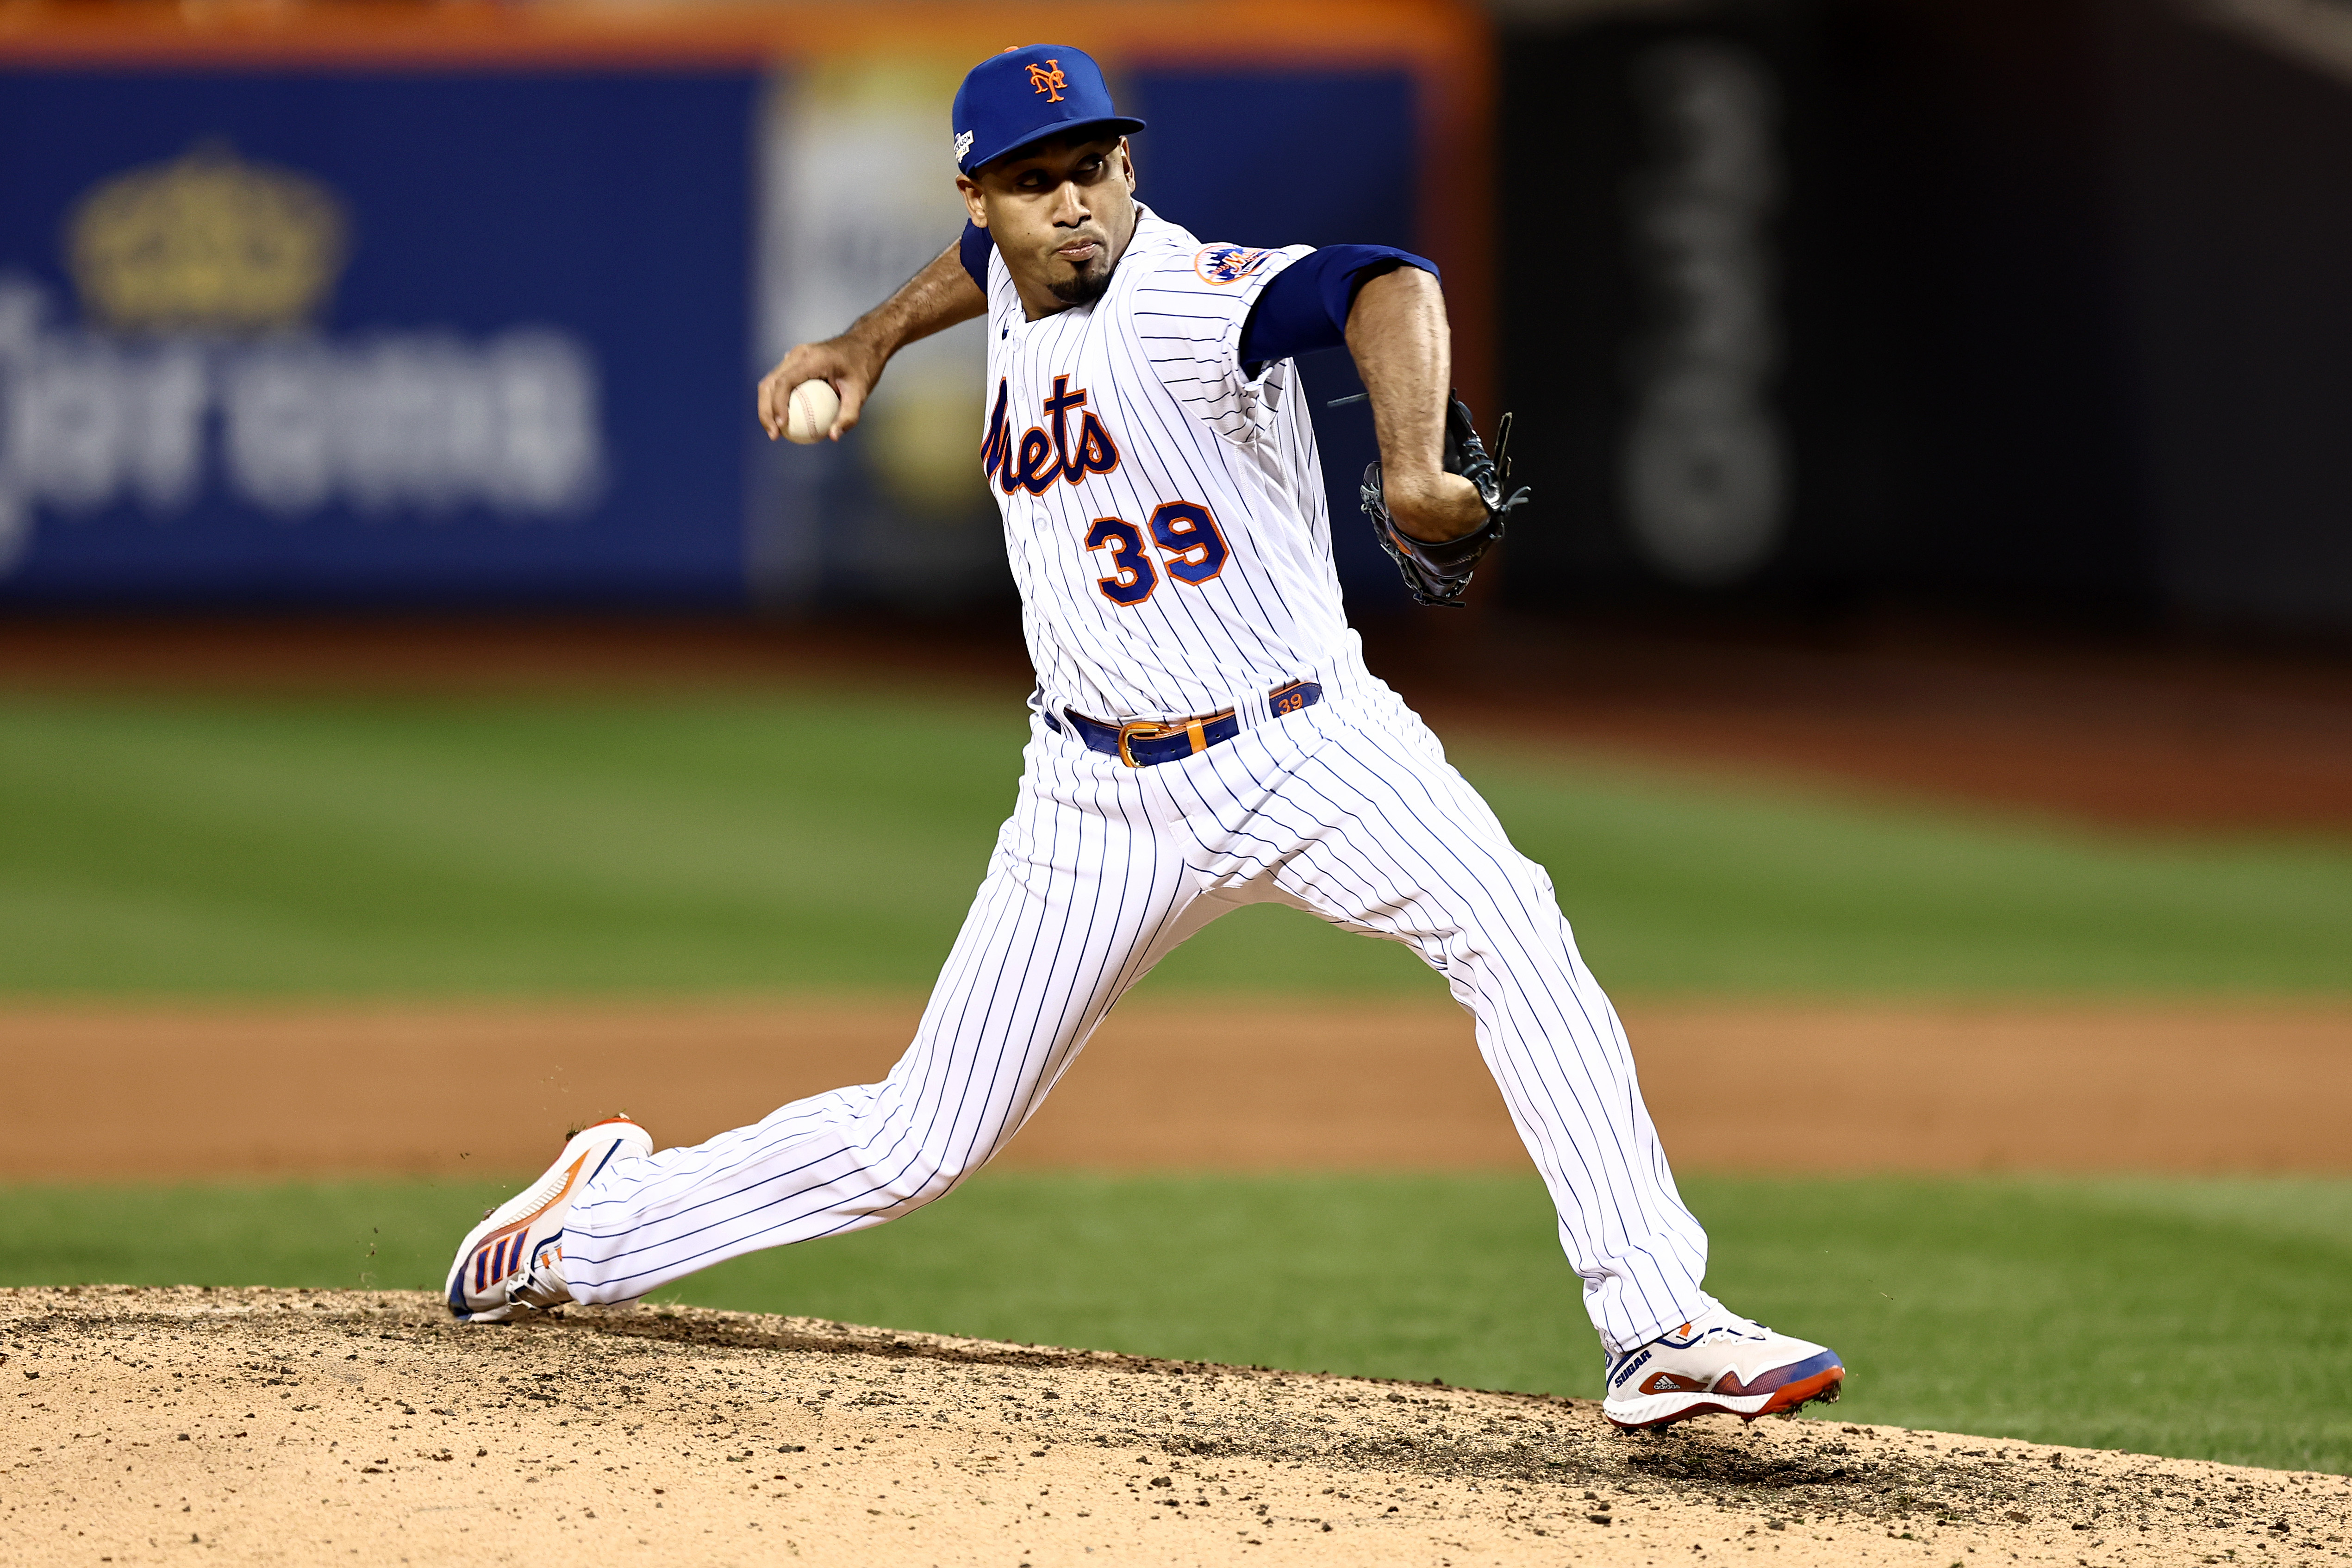 Edwin Diaz #39 of the New York Mets throws a pitch against the San Diego Padres during the eighth inning in game three of the National League Wild Card Series at Citi Field on October 09, 2022 in the Flushing neighborhood of the Queens borough of New York City.